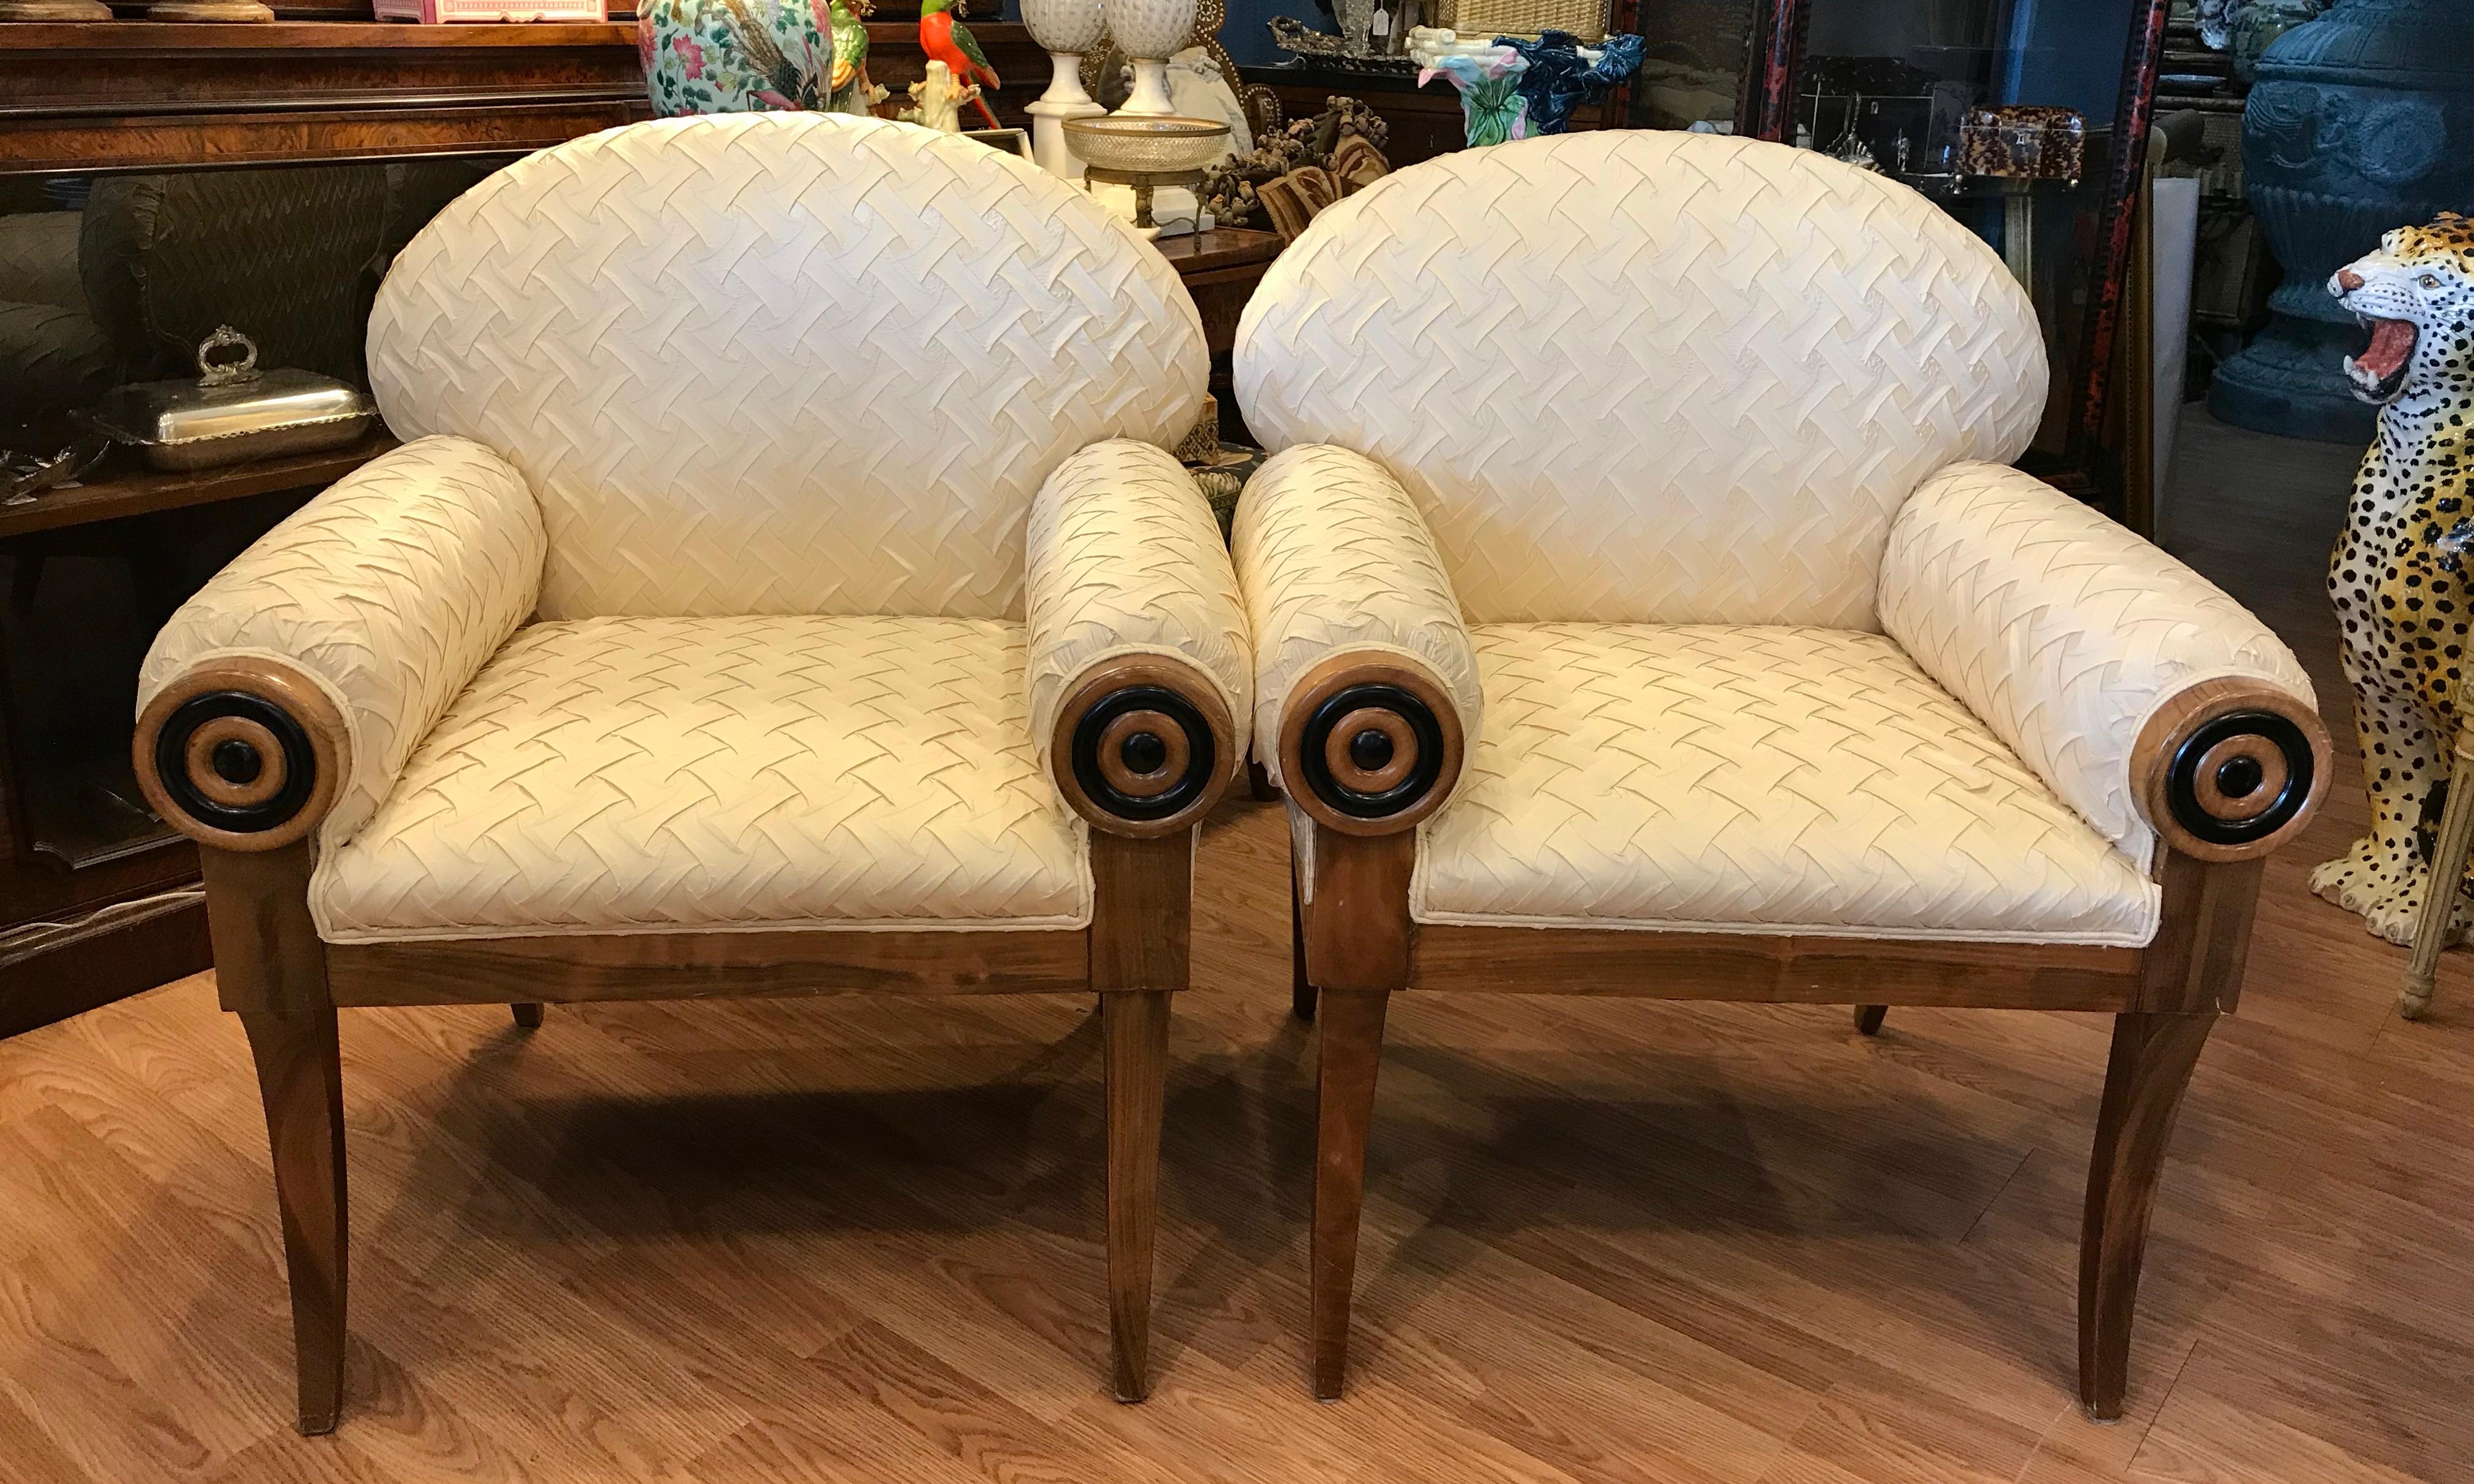 American Pair of Art Deco Inspired Midcentury Club Chairs